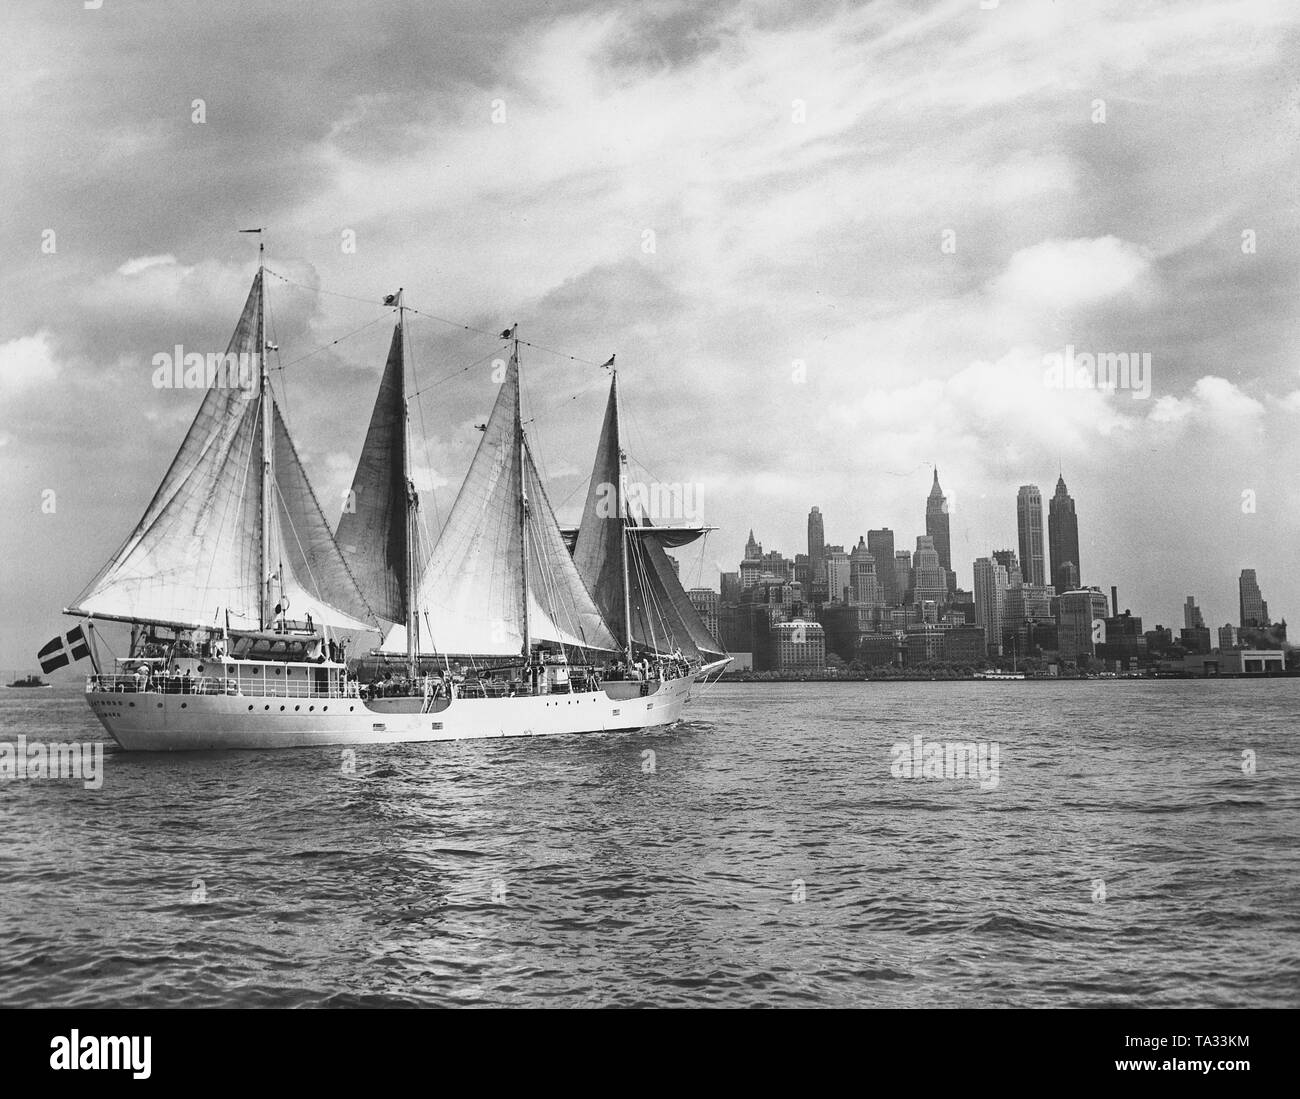 The Swedish training ship Albatros in front of the New York City skyline. The training ship is operated by a private company. Stock Photo